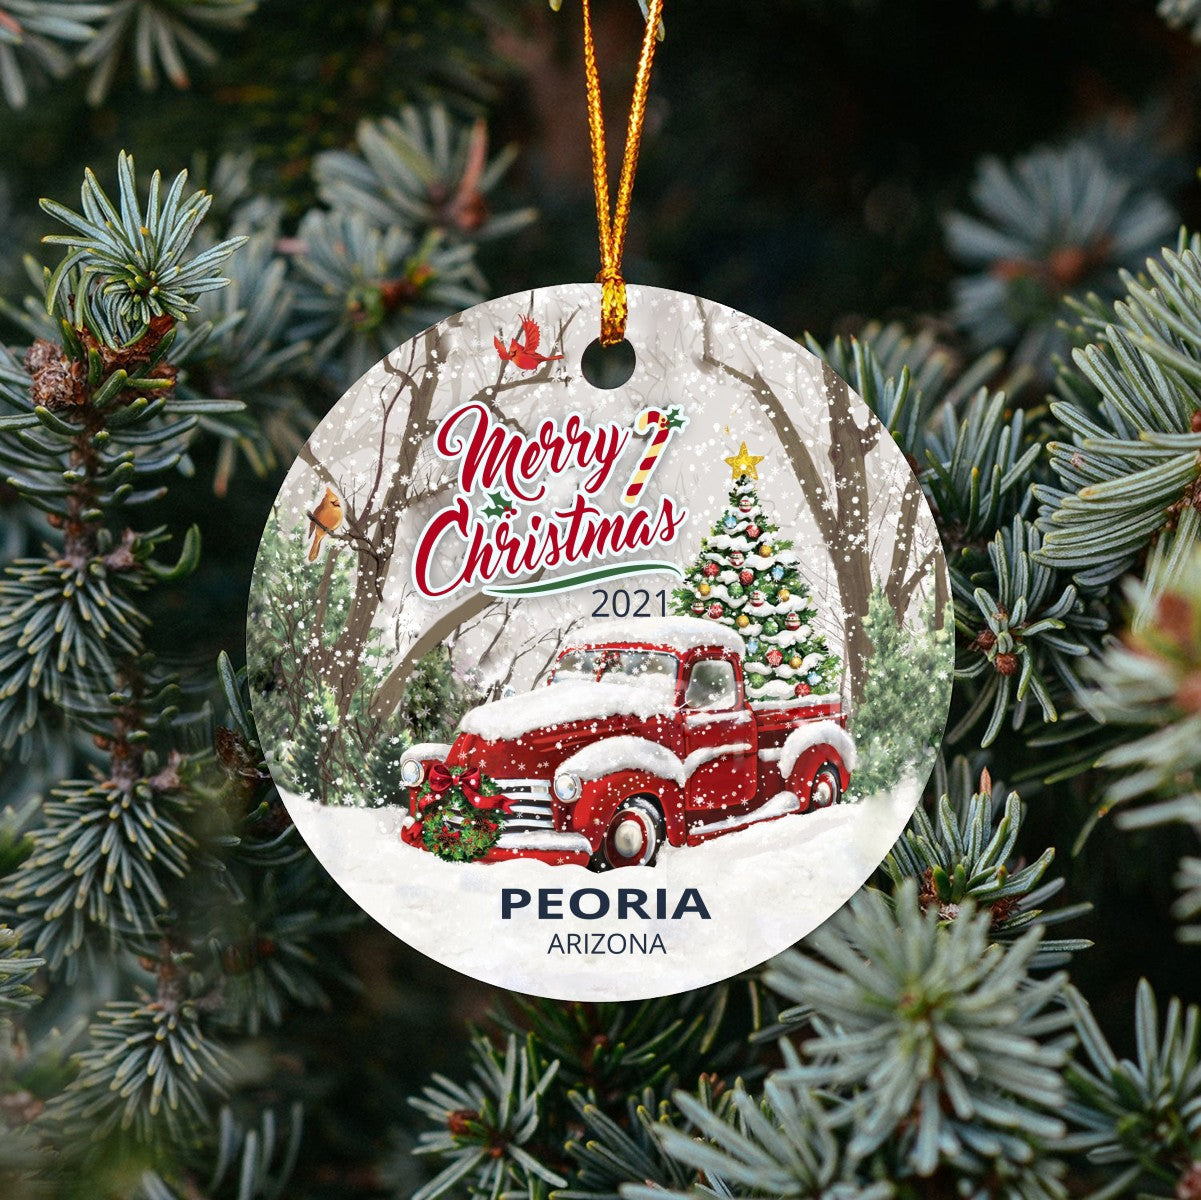 Christmas Tree Ornaments Peoria - Ornament Customize With Name City And State Peoria Arizona AZ - Red Truck Xmas Ornaments 3'' Plastic Gift For Family, Friend And Housewarming